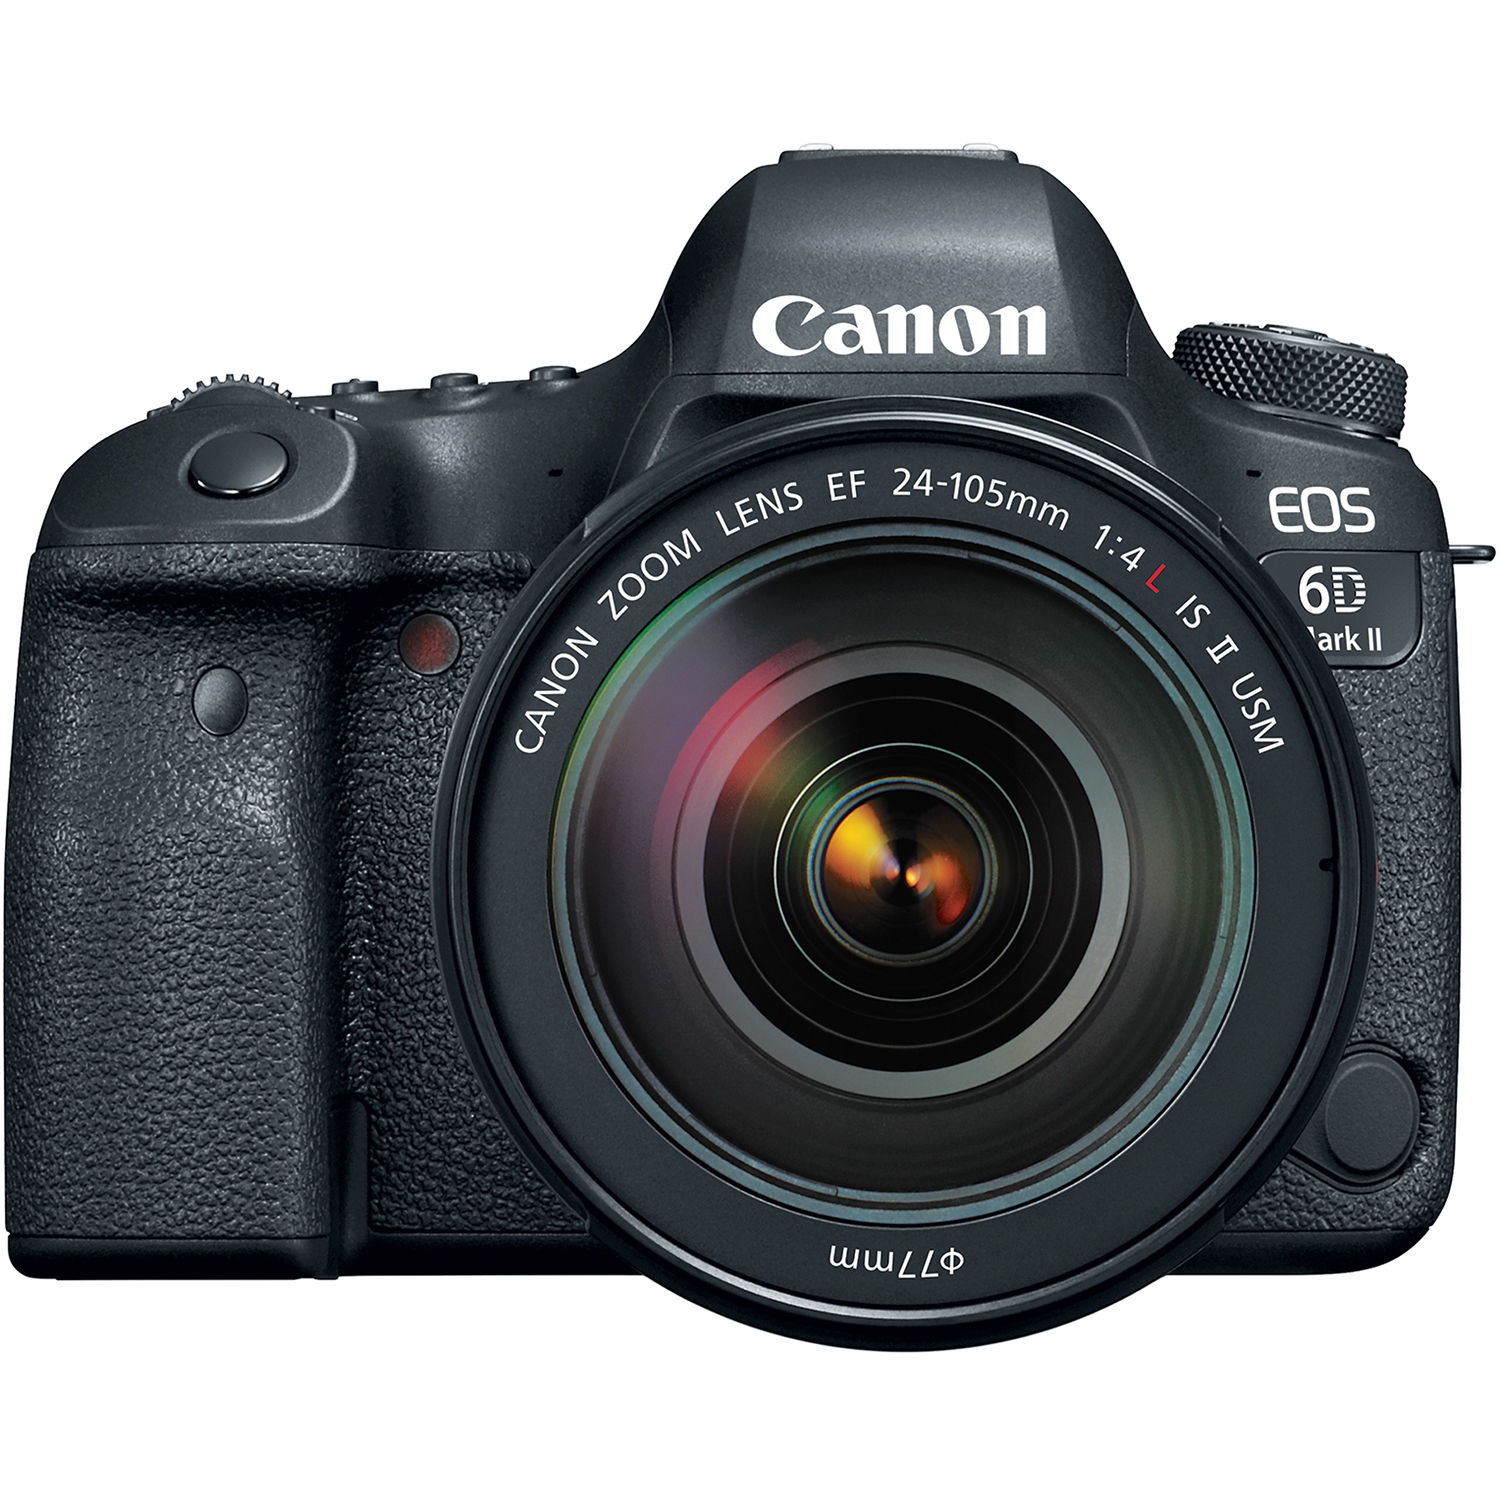 Canon EOS 6D Mark II DSLR Camera with 24-105mm f/4L II Lens - image 2 of 4